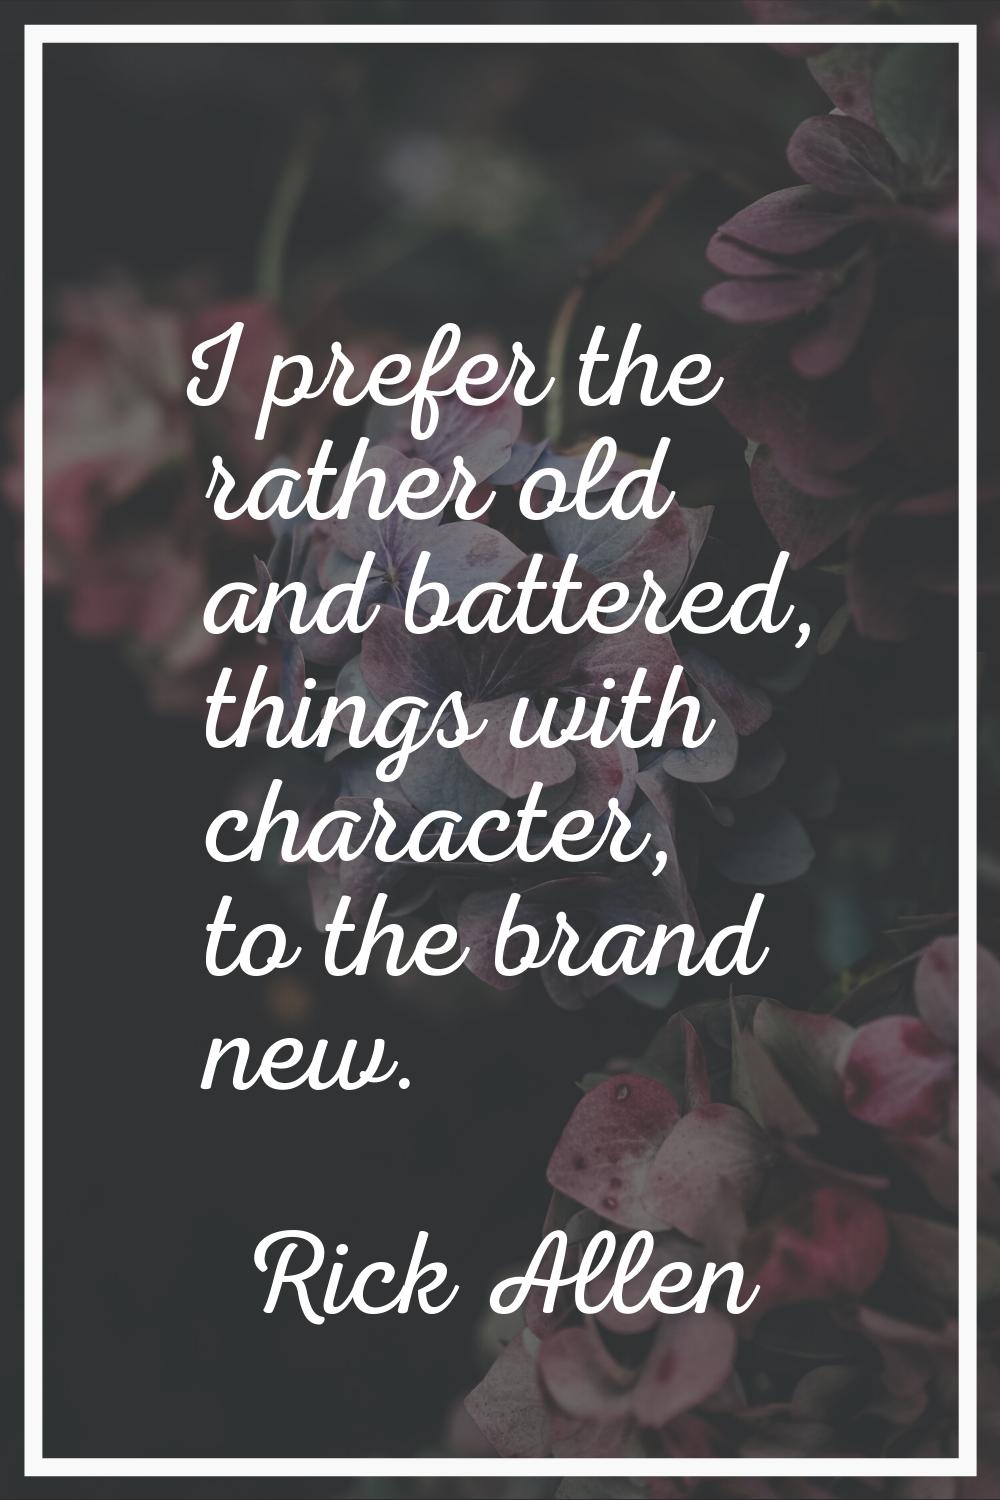 I prefer the rather old and battered, things with character, to the brand new.